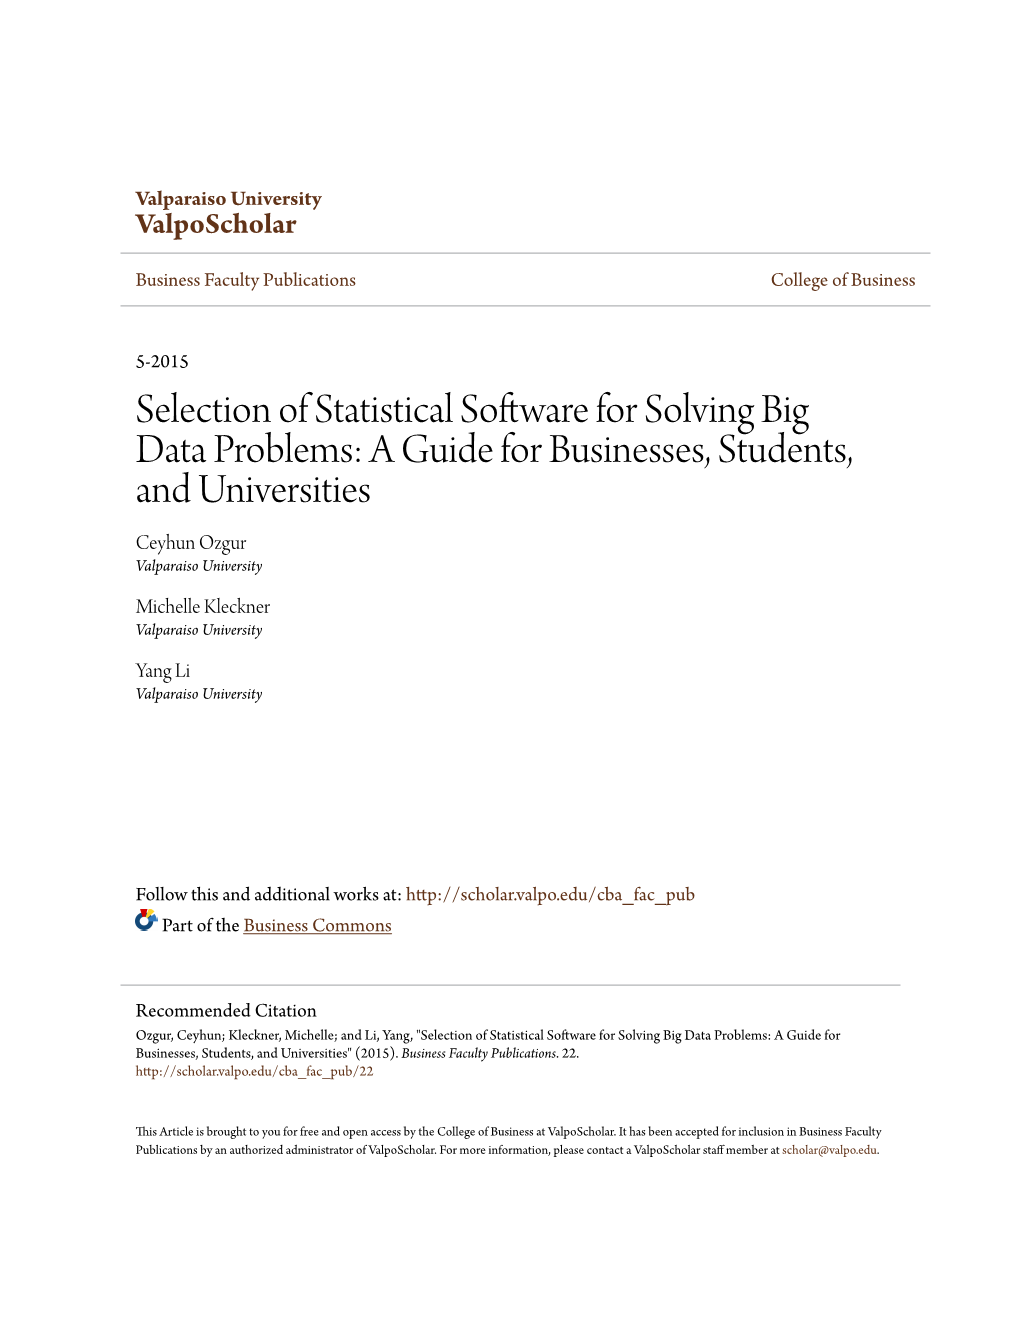 Selection of Statistical Software for Solving Big Data Problems: a Guide for Businesses, Students, and Universities Ceyhun Ozgur Valparaiso University